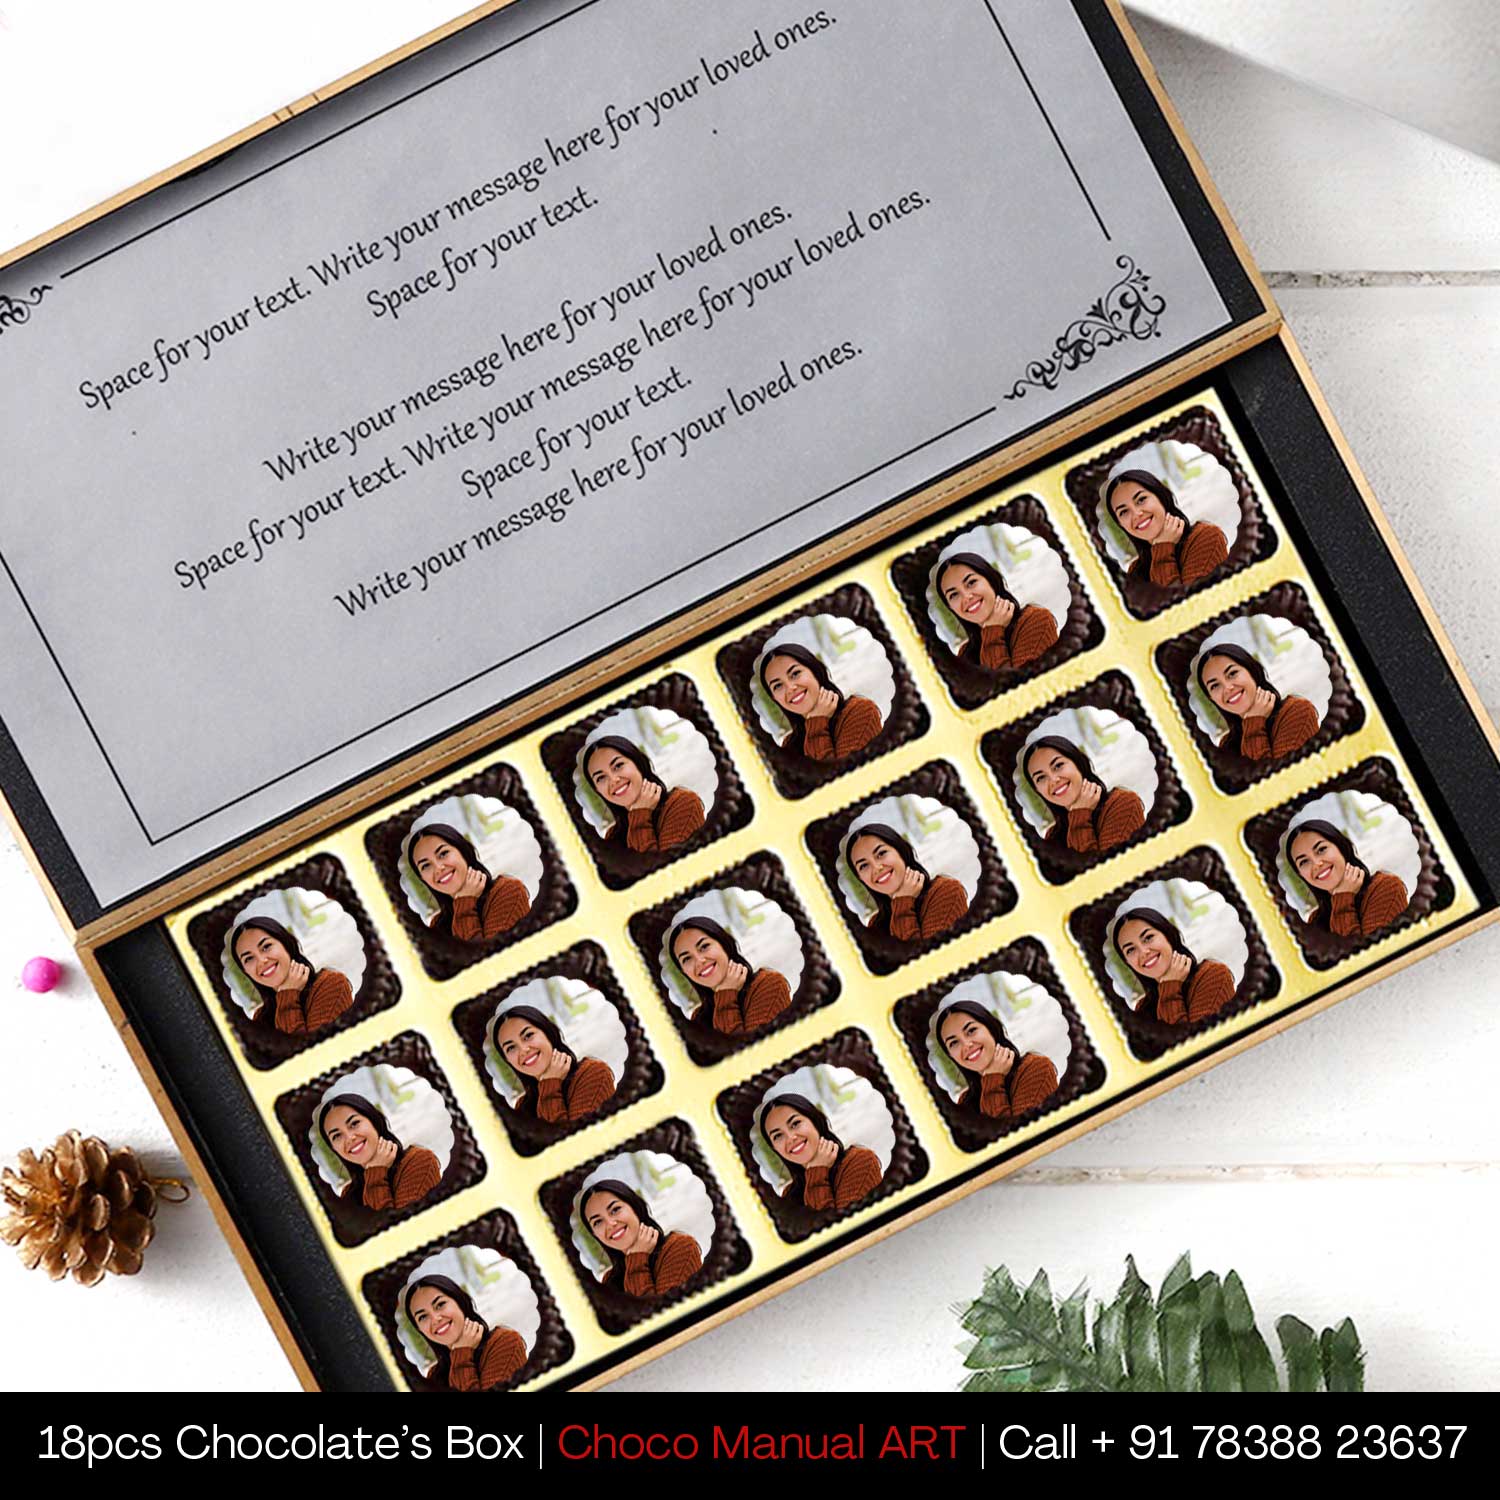  personalised chocolate personalised chocolates with names personalized chocolates for birthday personalised chocolates with photo personalised chocolate gift box customised chocolate gifts personalised chocolates with photo india name on chocolate bar